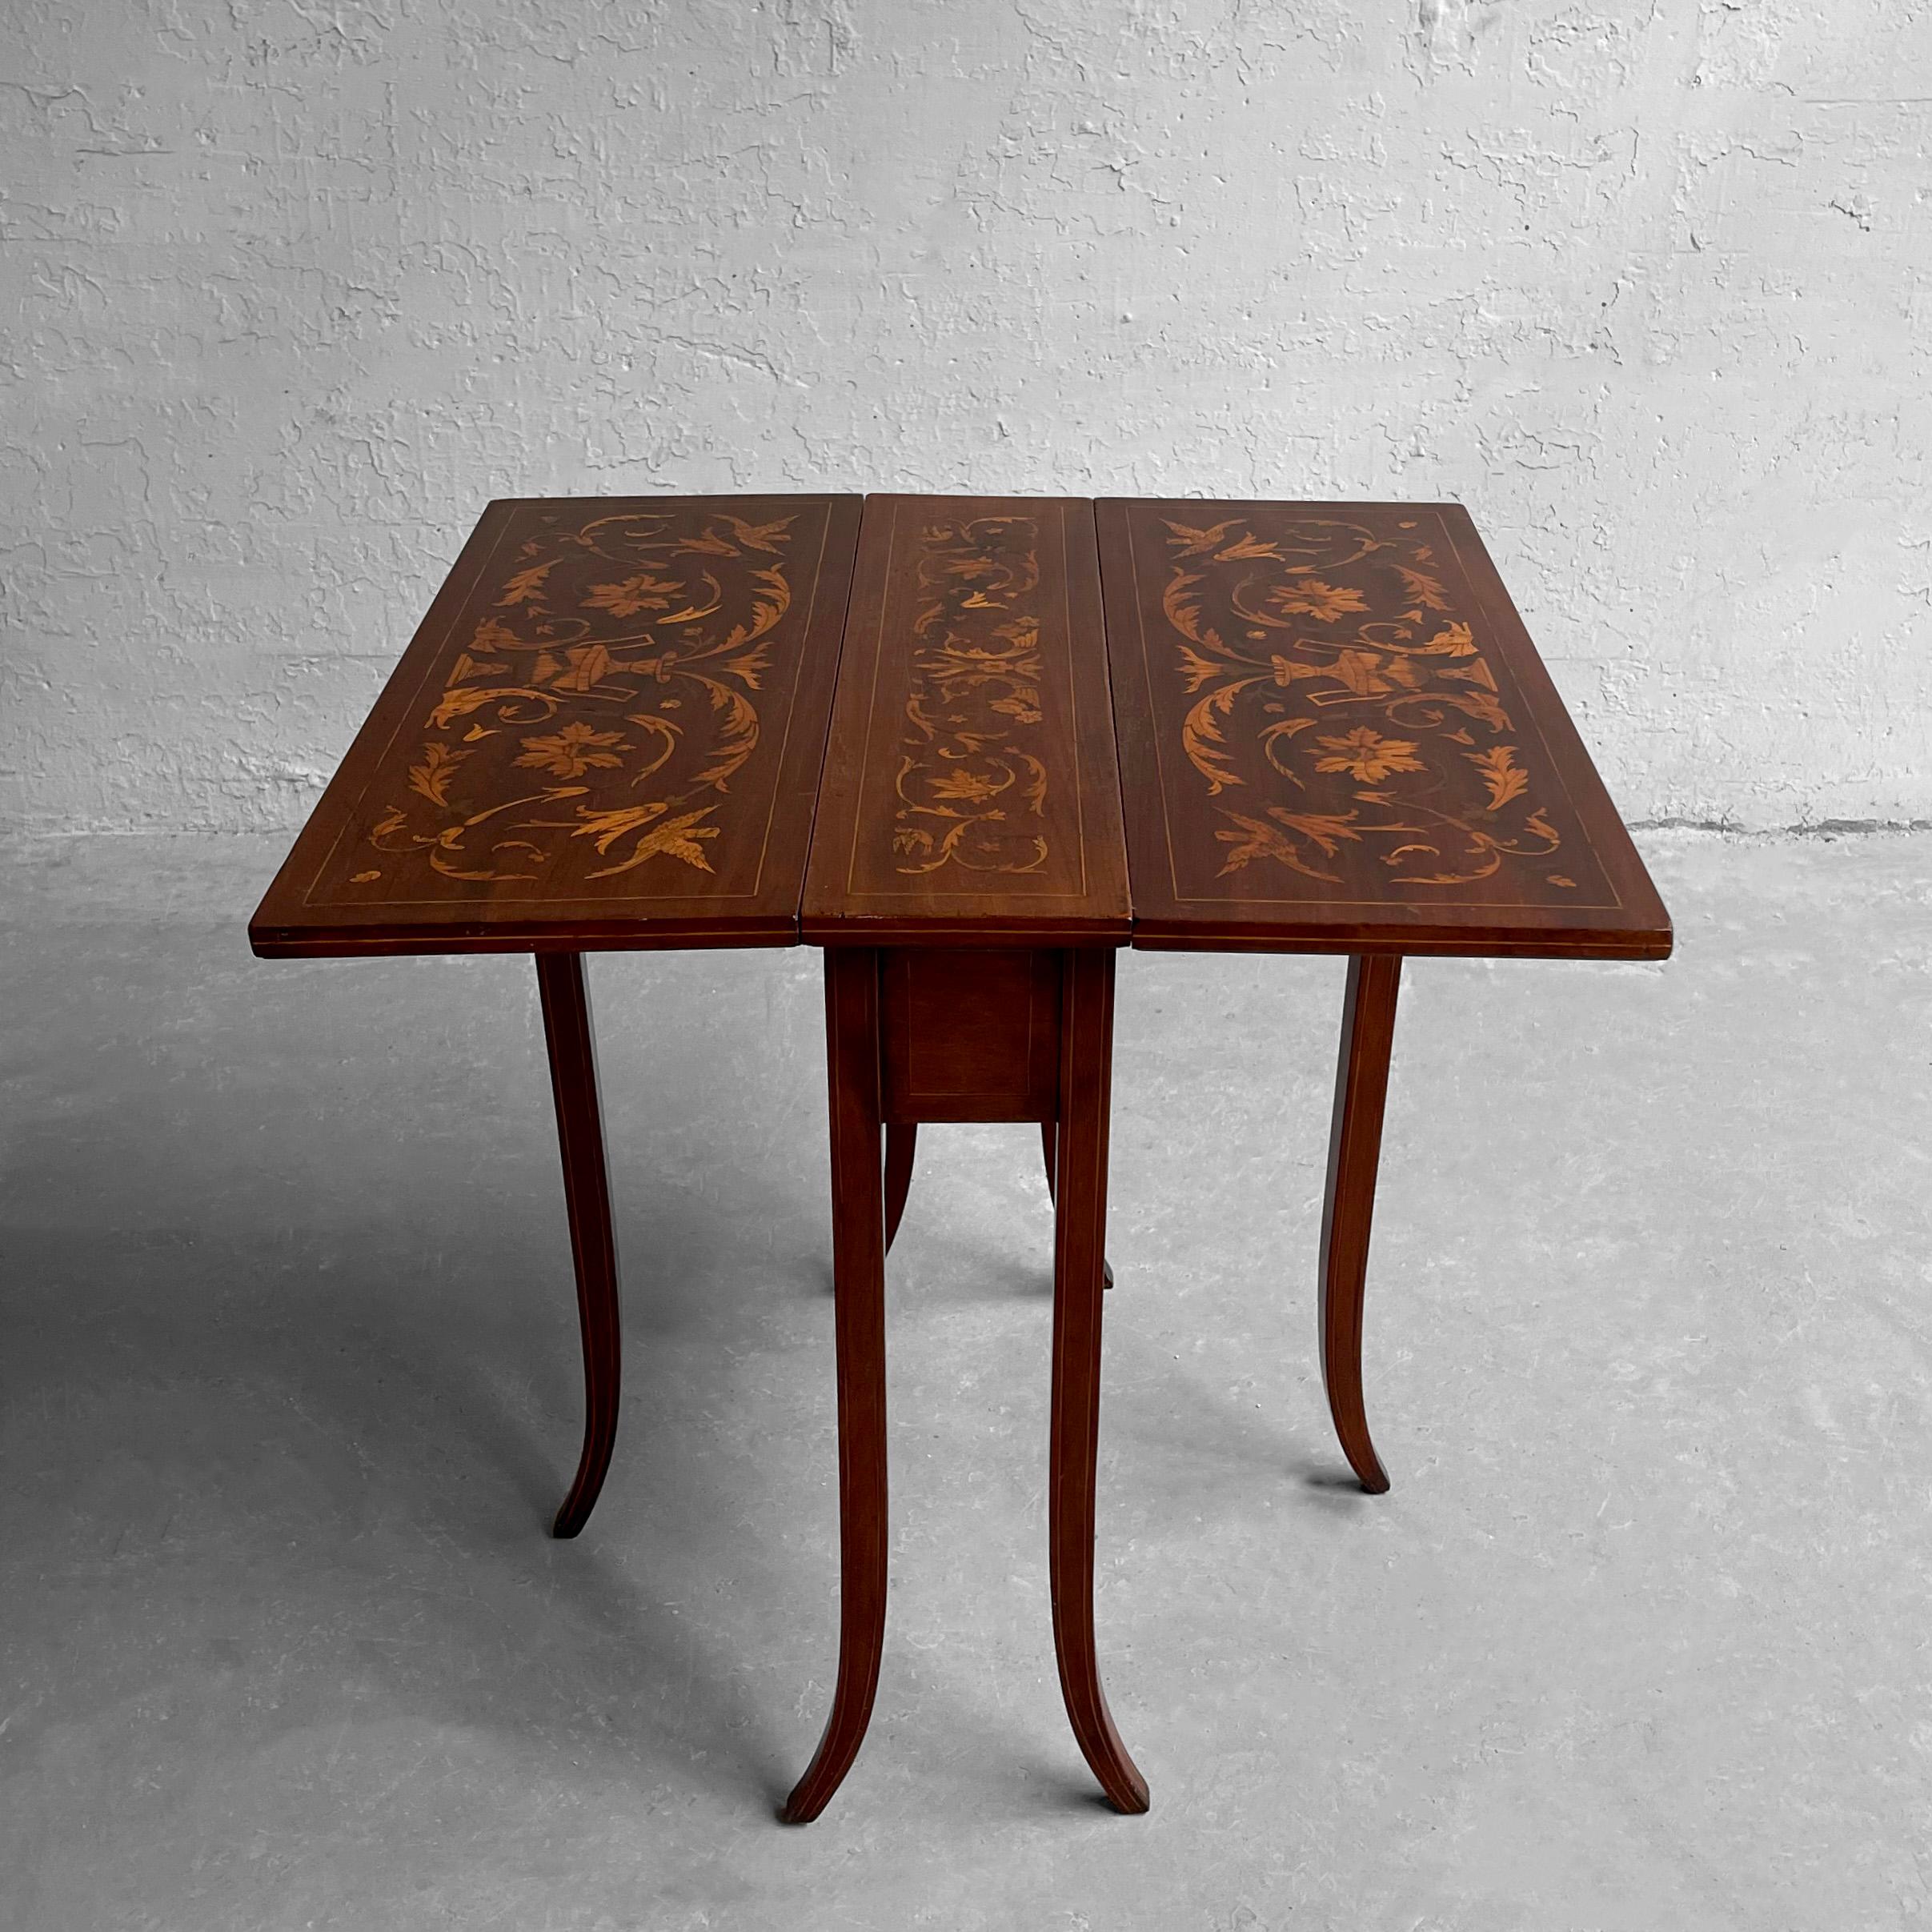 Petite, English Regency, drop-leaf, mahogany side table with symmetrical marquetry, boxwood inlay work and beautifully curved saber legs. The table extends from 7.5 - 26 inches deep with a drawer for storage.